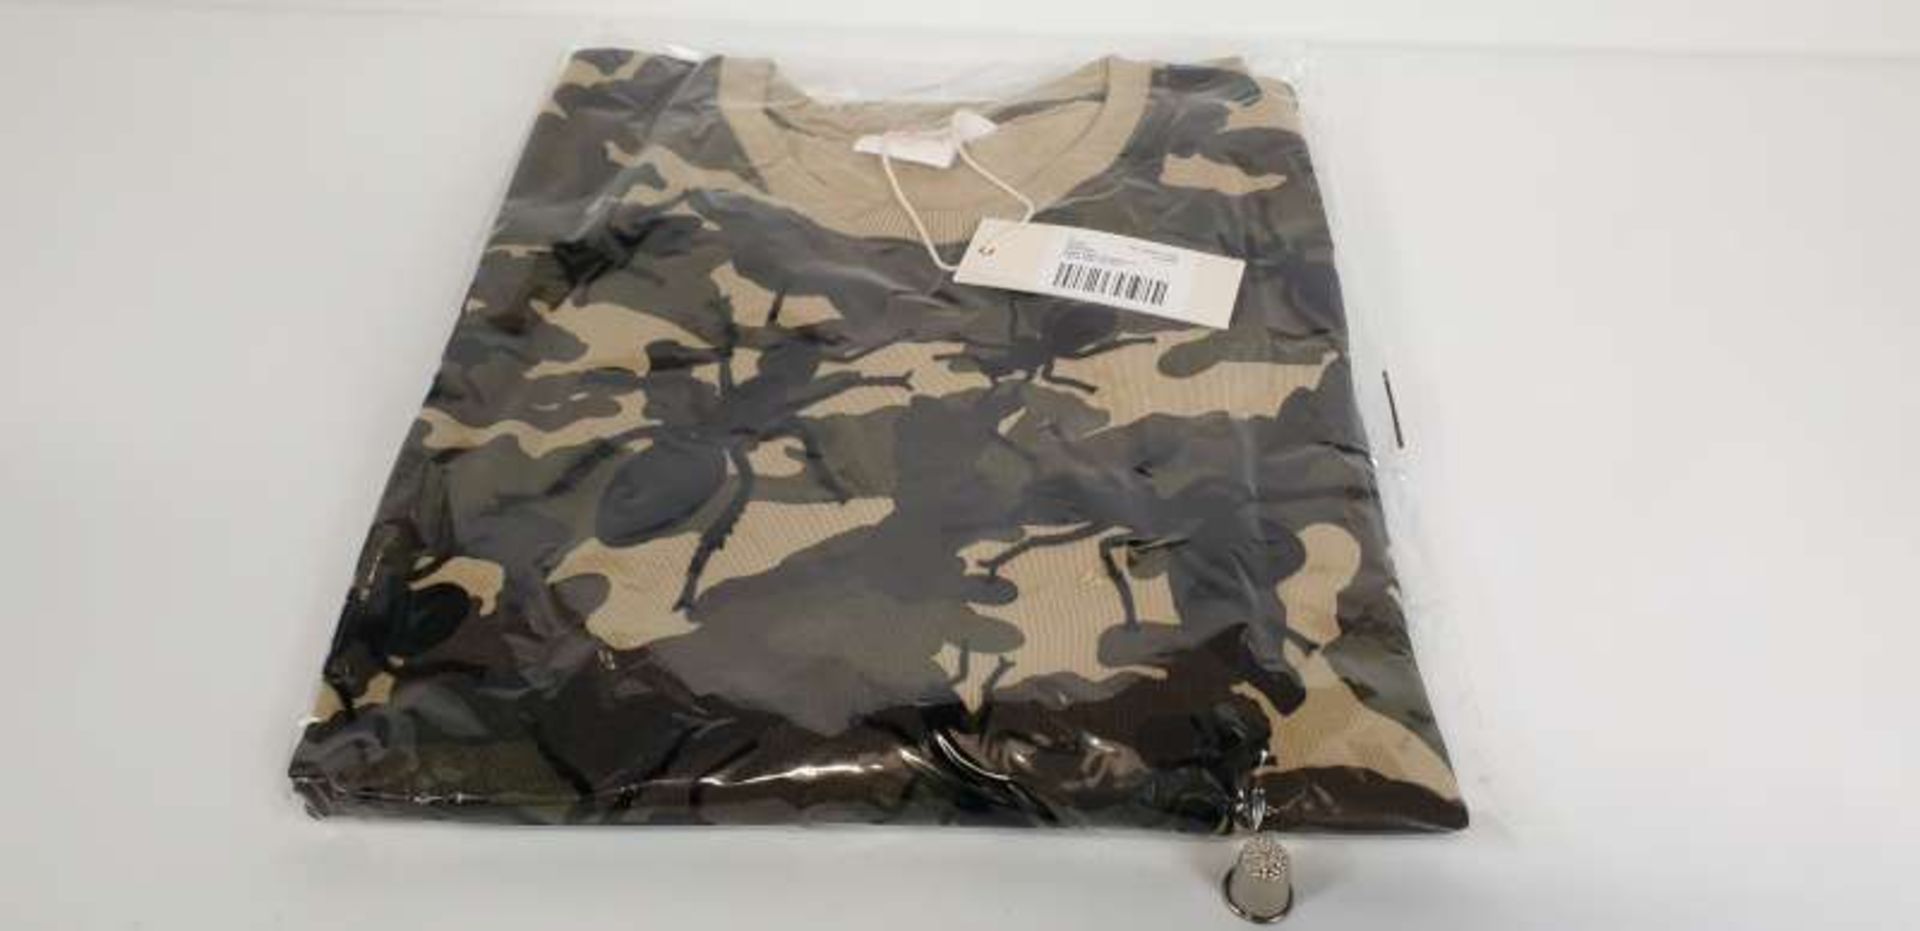 10 X BRAND NEW ILLEGAL CLUB PARIS SWEATSHIRTS IN CAMO WITH ANT PRINT IN VARIOUS SIZES